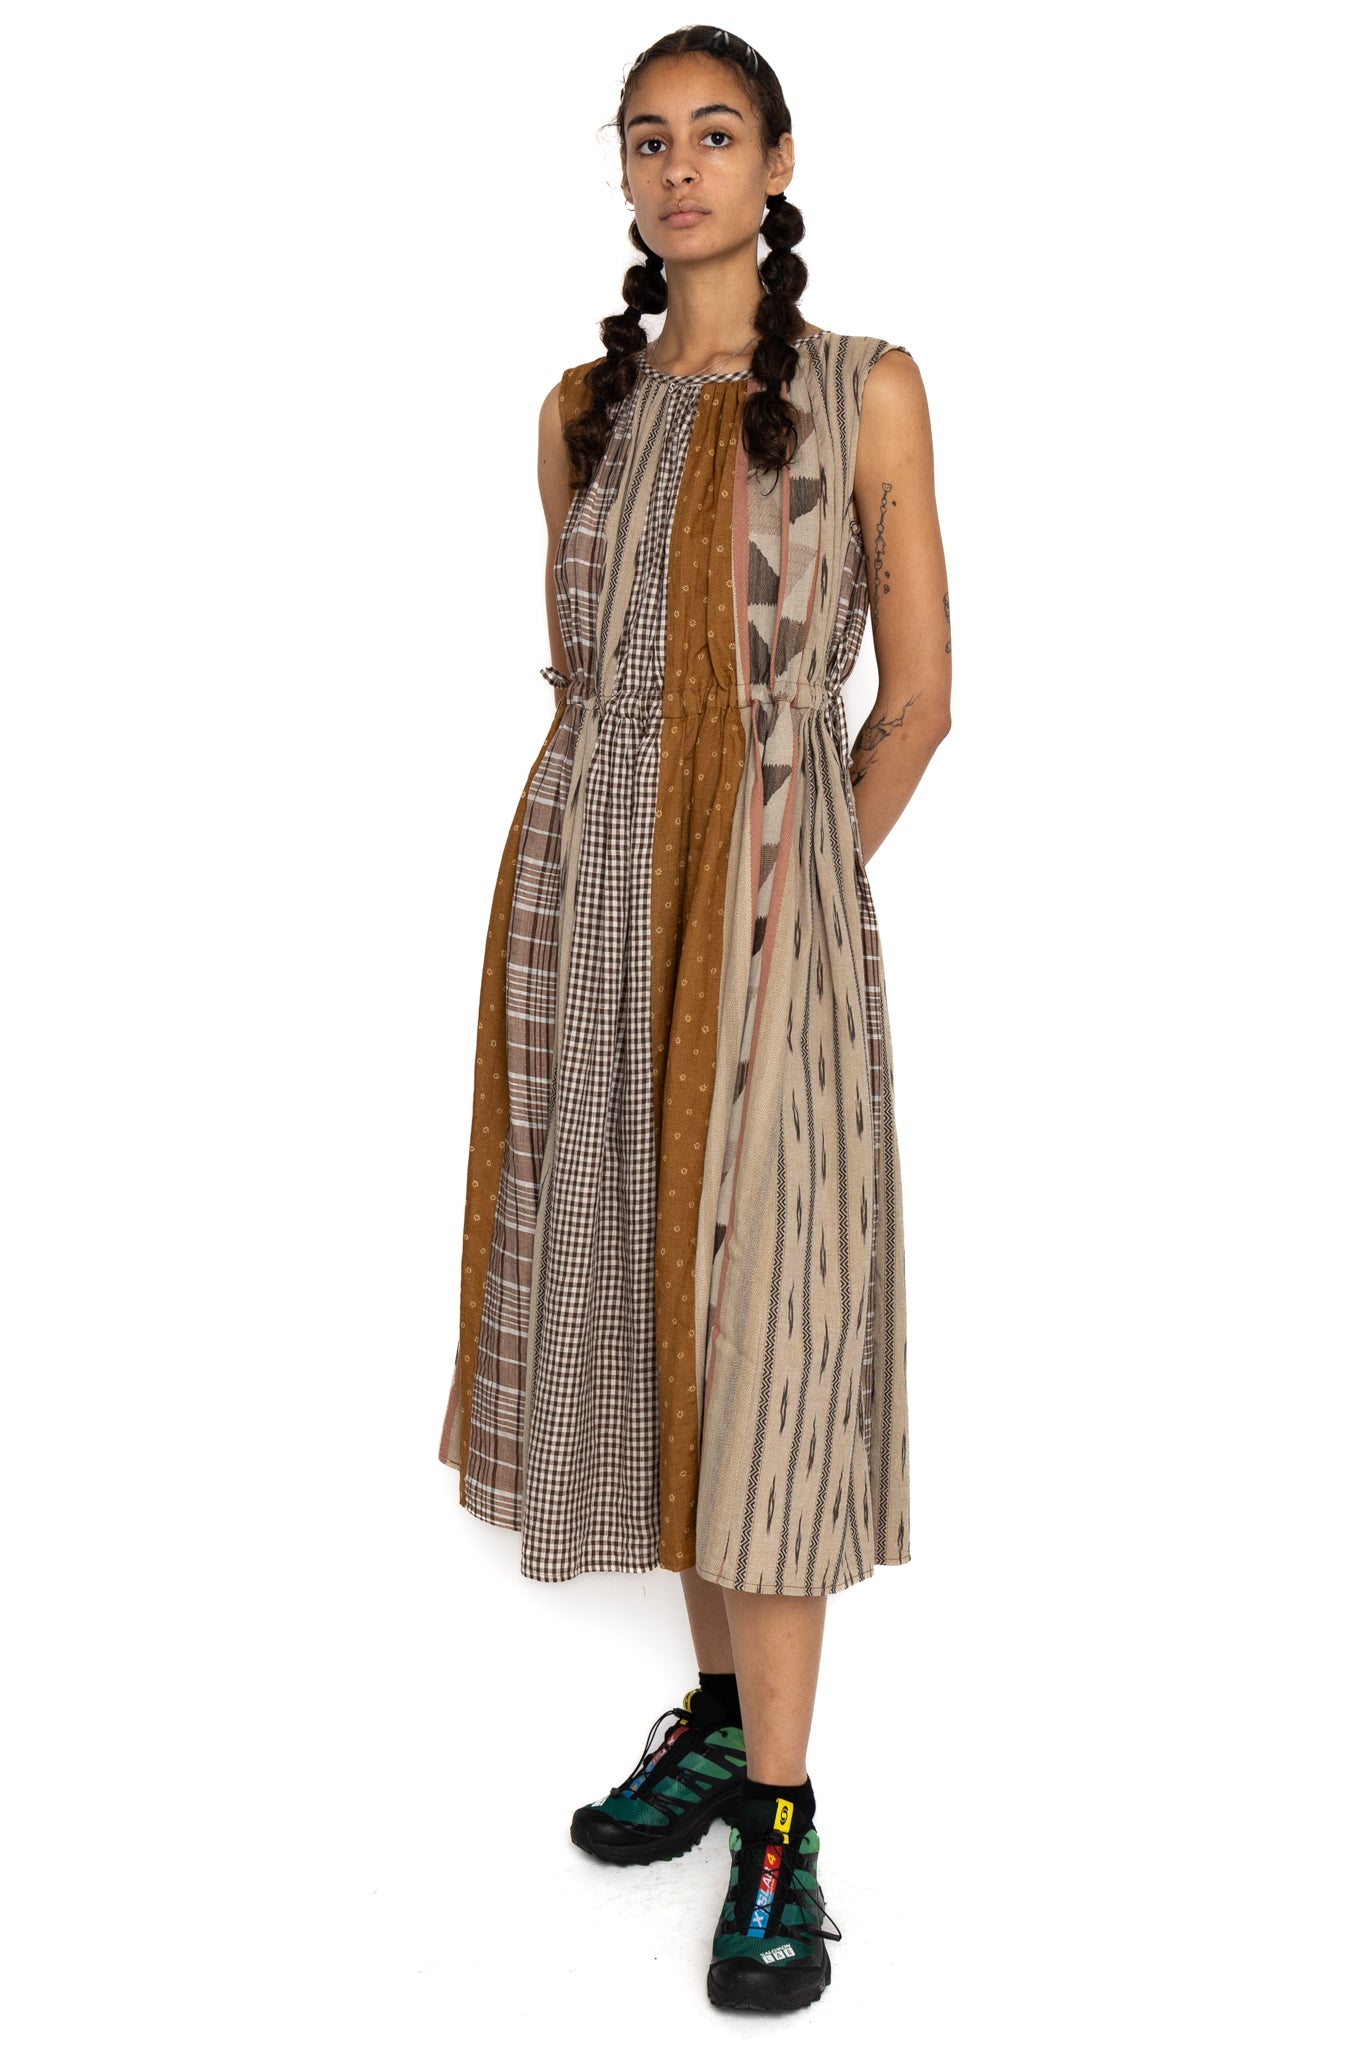 Kapital patchwork dress - cotton and linen blend. Adjustable ties to fix to your preferred silhouette 